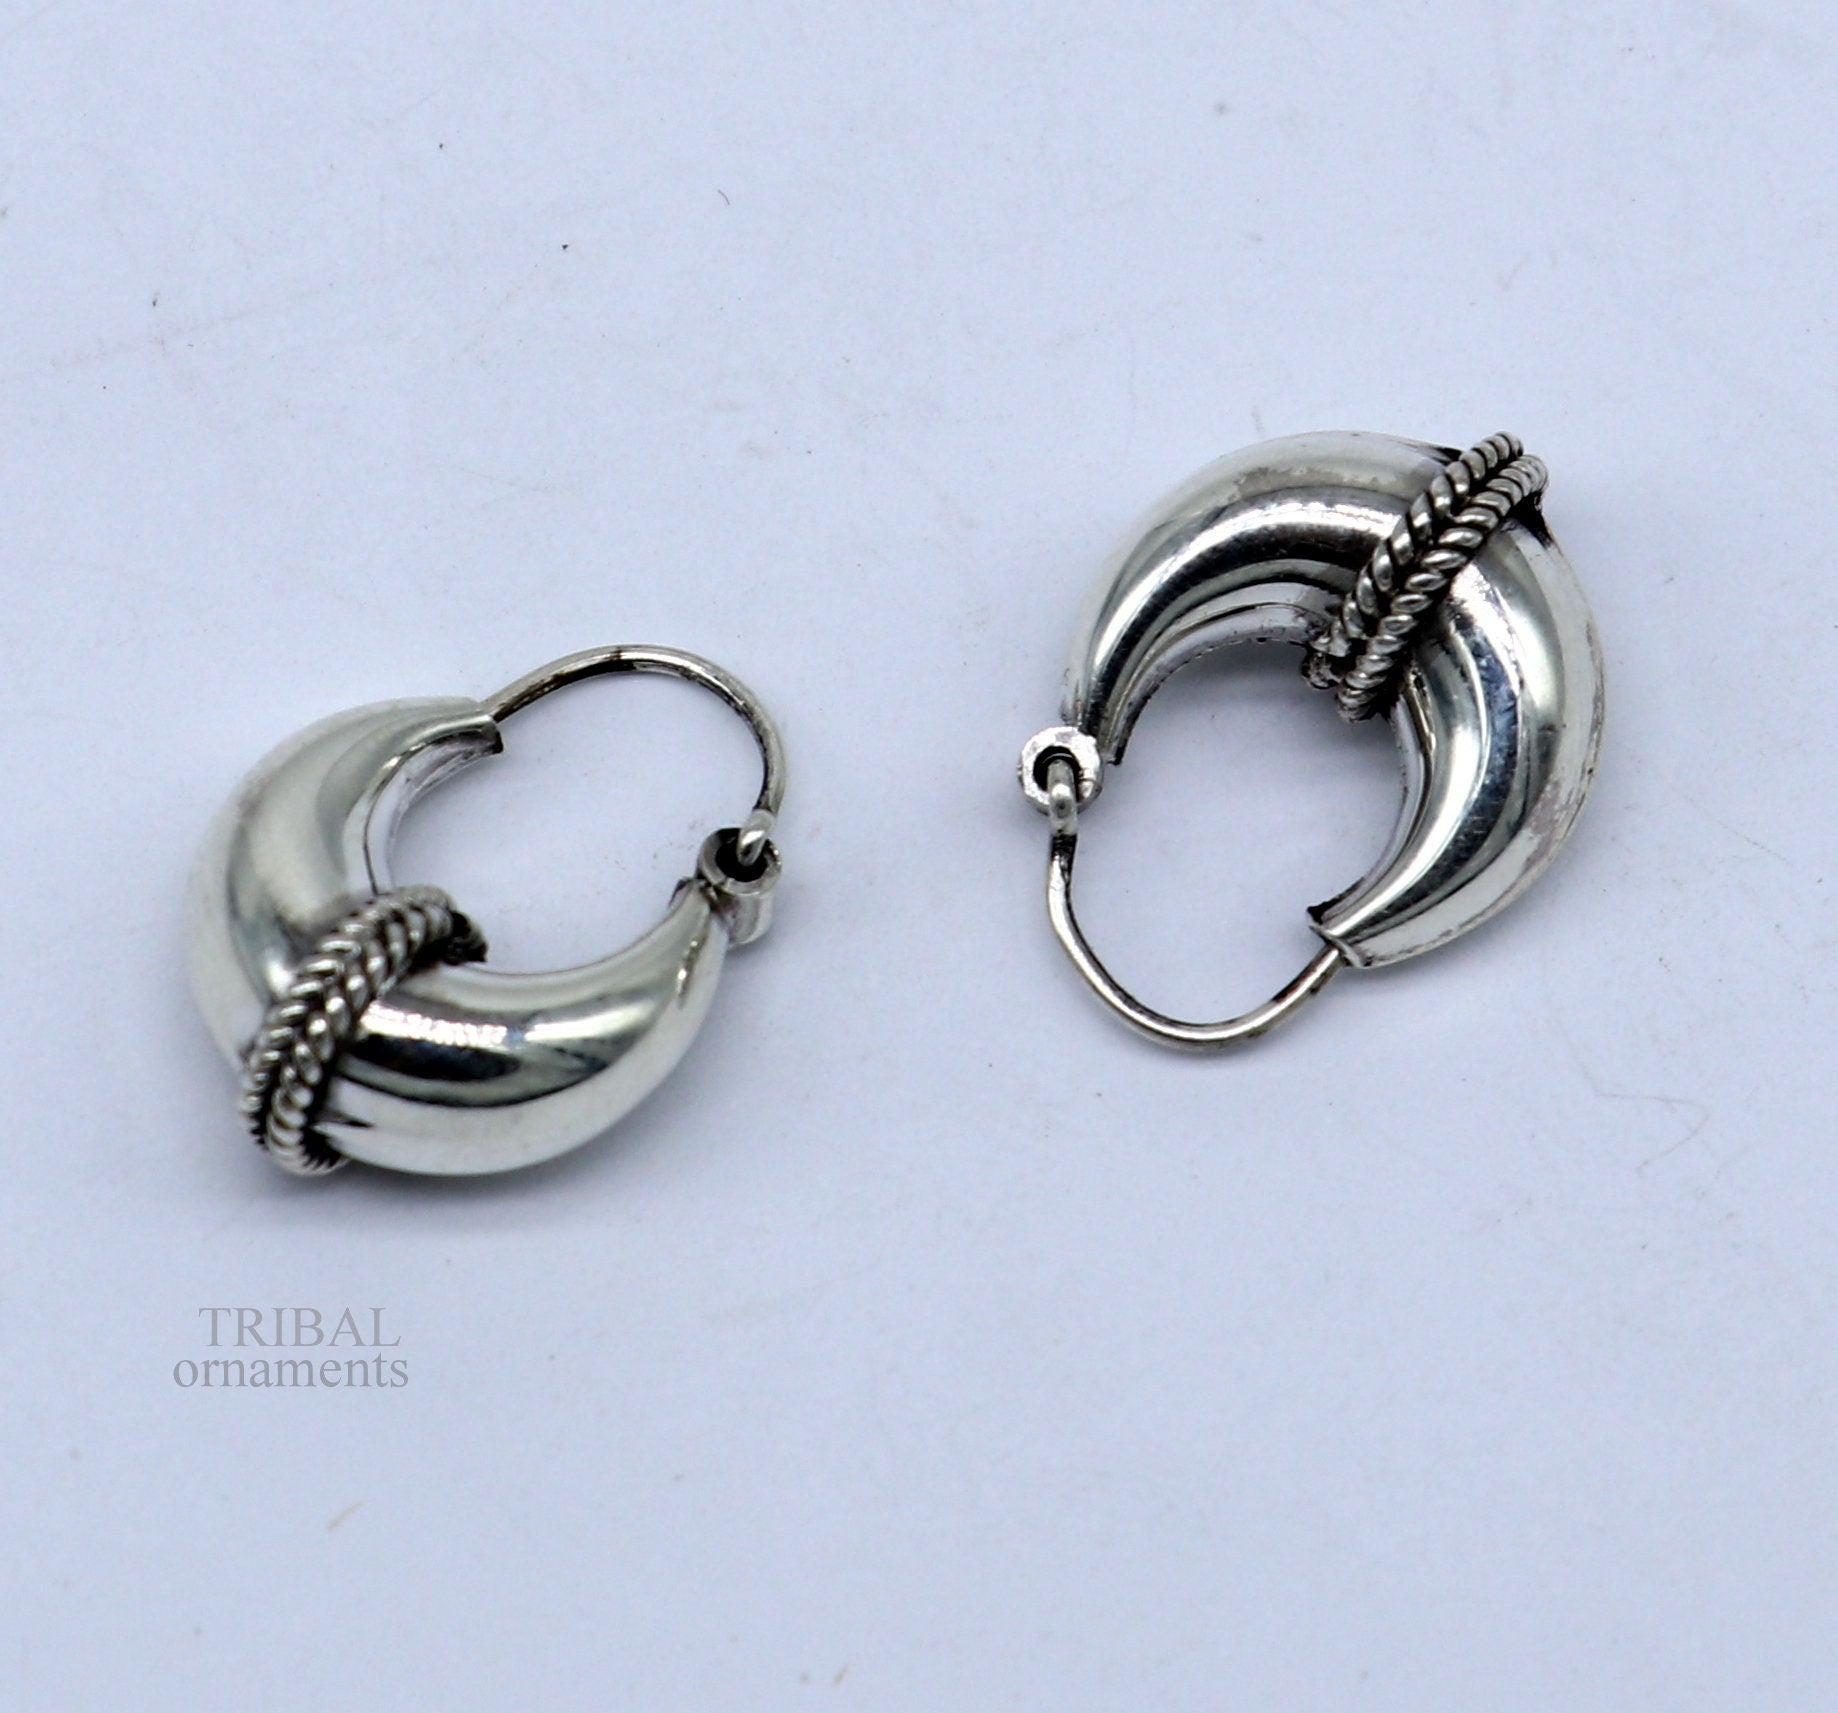 Vintage Design 925 sterling silver fabulous hoops earring, tribal kundal earring from Rajasthan India, best gifting unisex jewelry ear1048 - TRIBAL ORNAMENTS